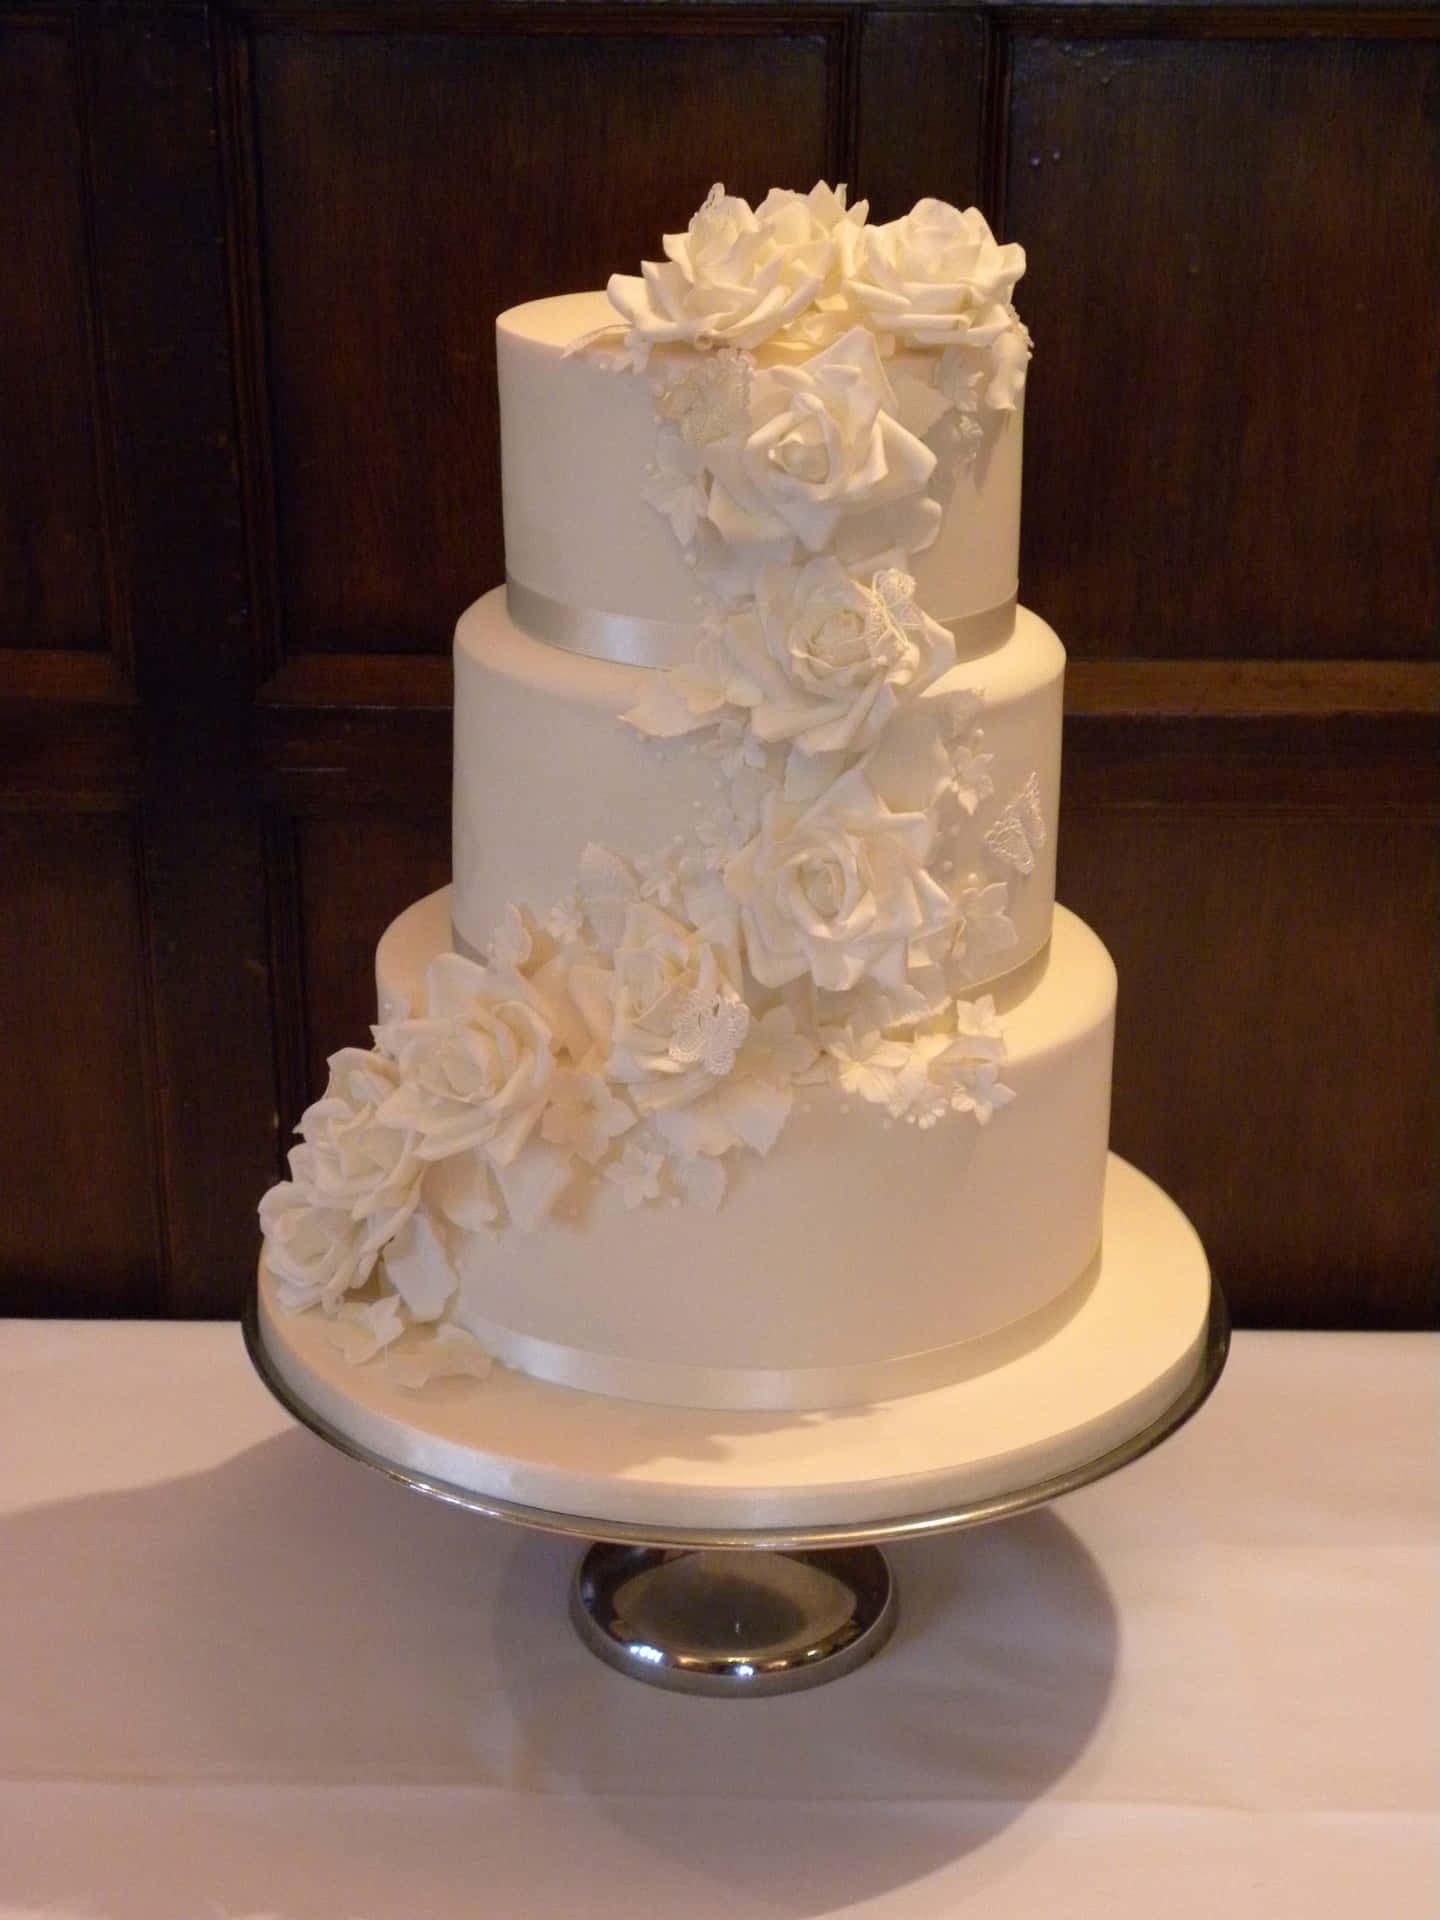 Two tiers of delicious delight at a beautiful wedding